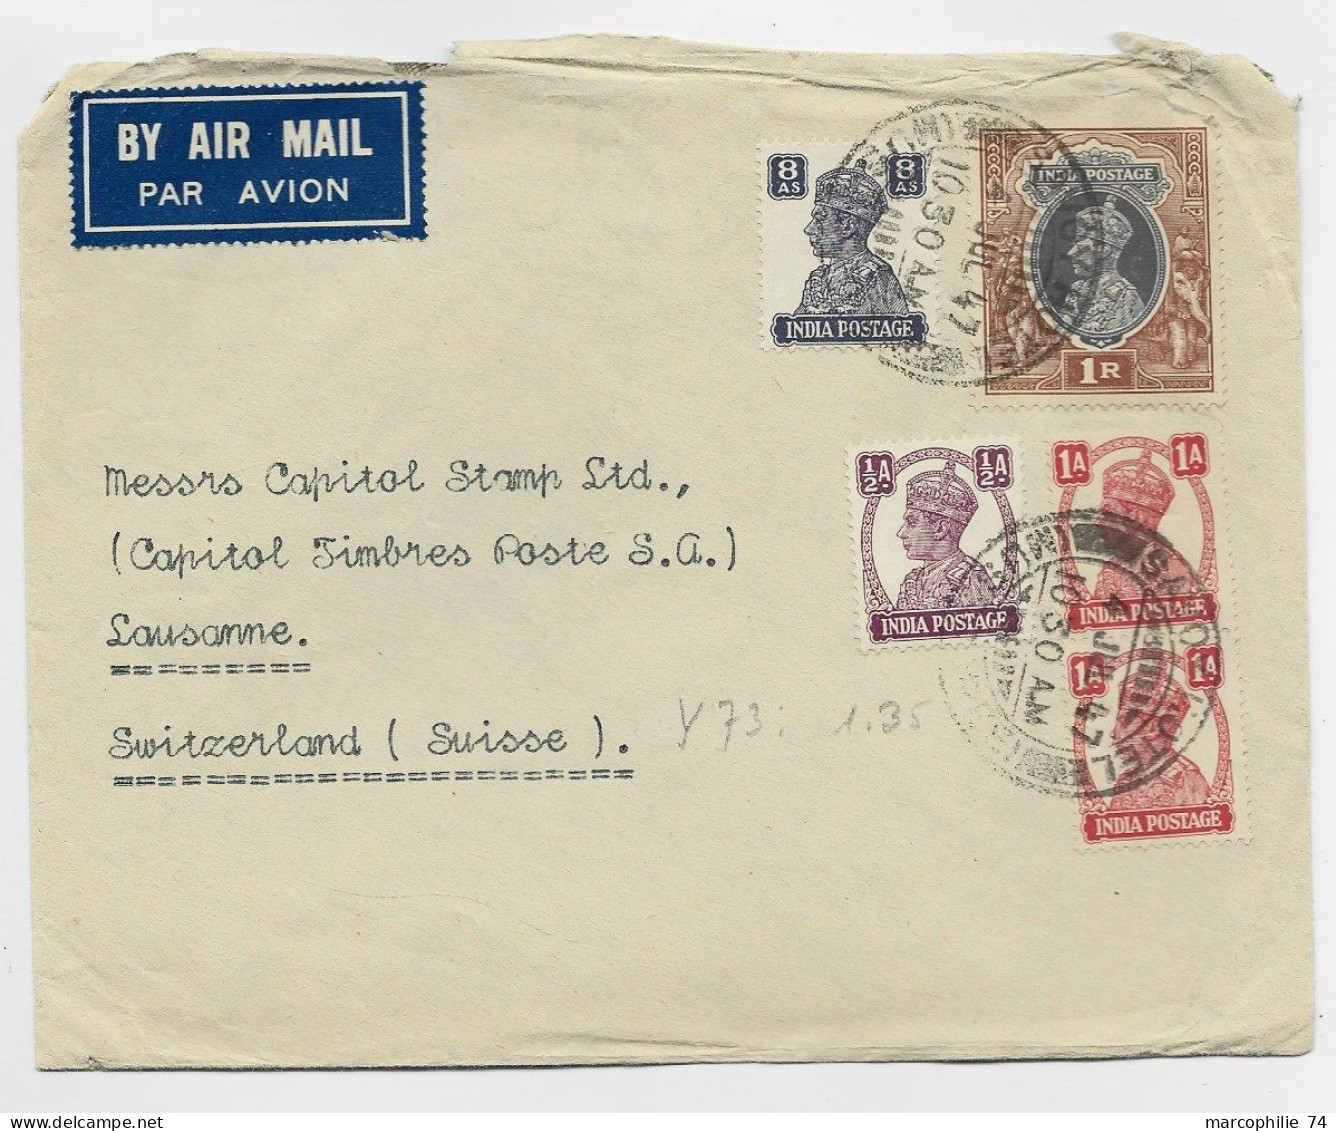 INDIA 1R +8AS+1/2 AS+ 1AX2 LETTRE COVER AIR MAIL SAVOY HOTEL 1947 TO SUISSE - 1936-47  George VI